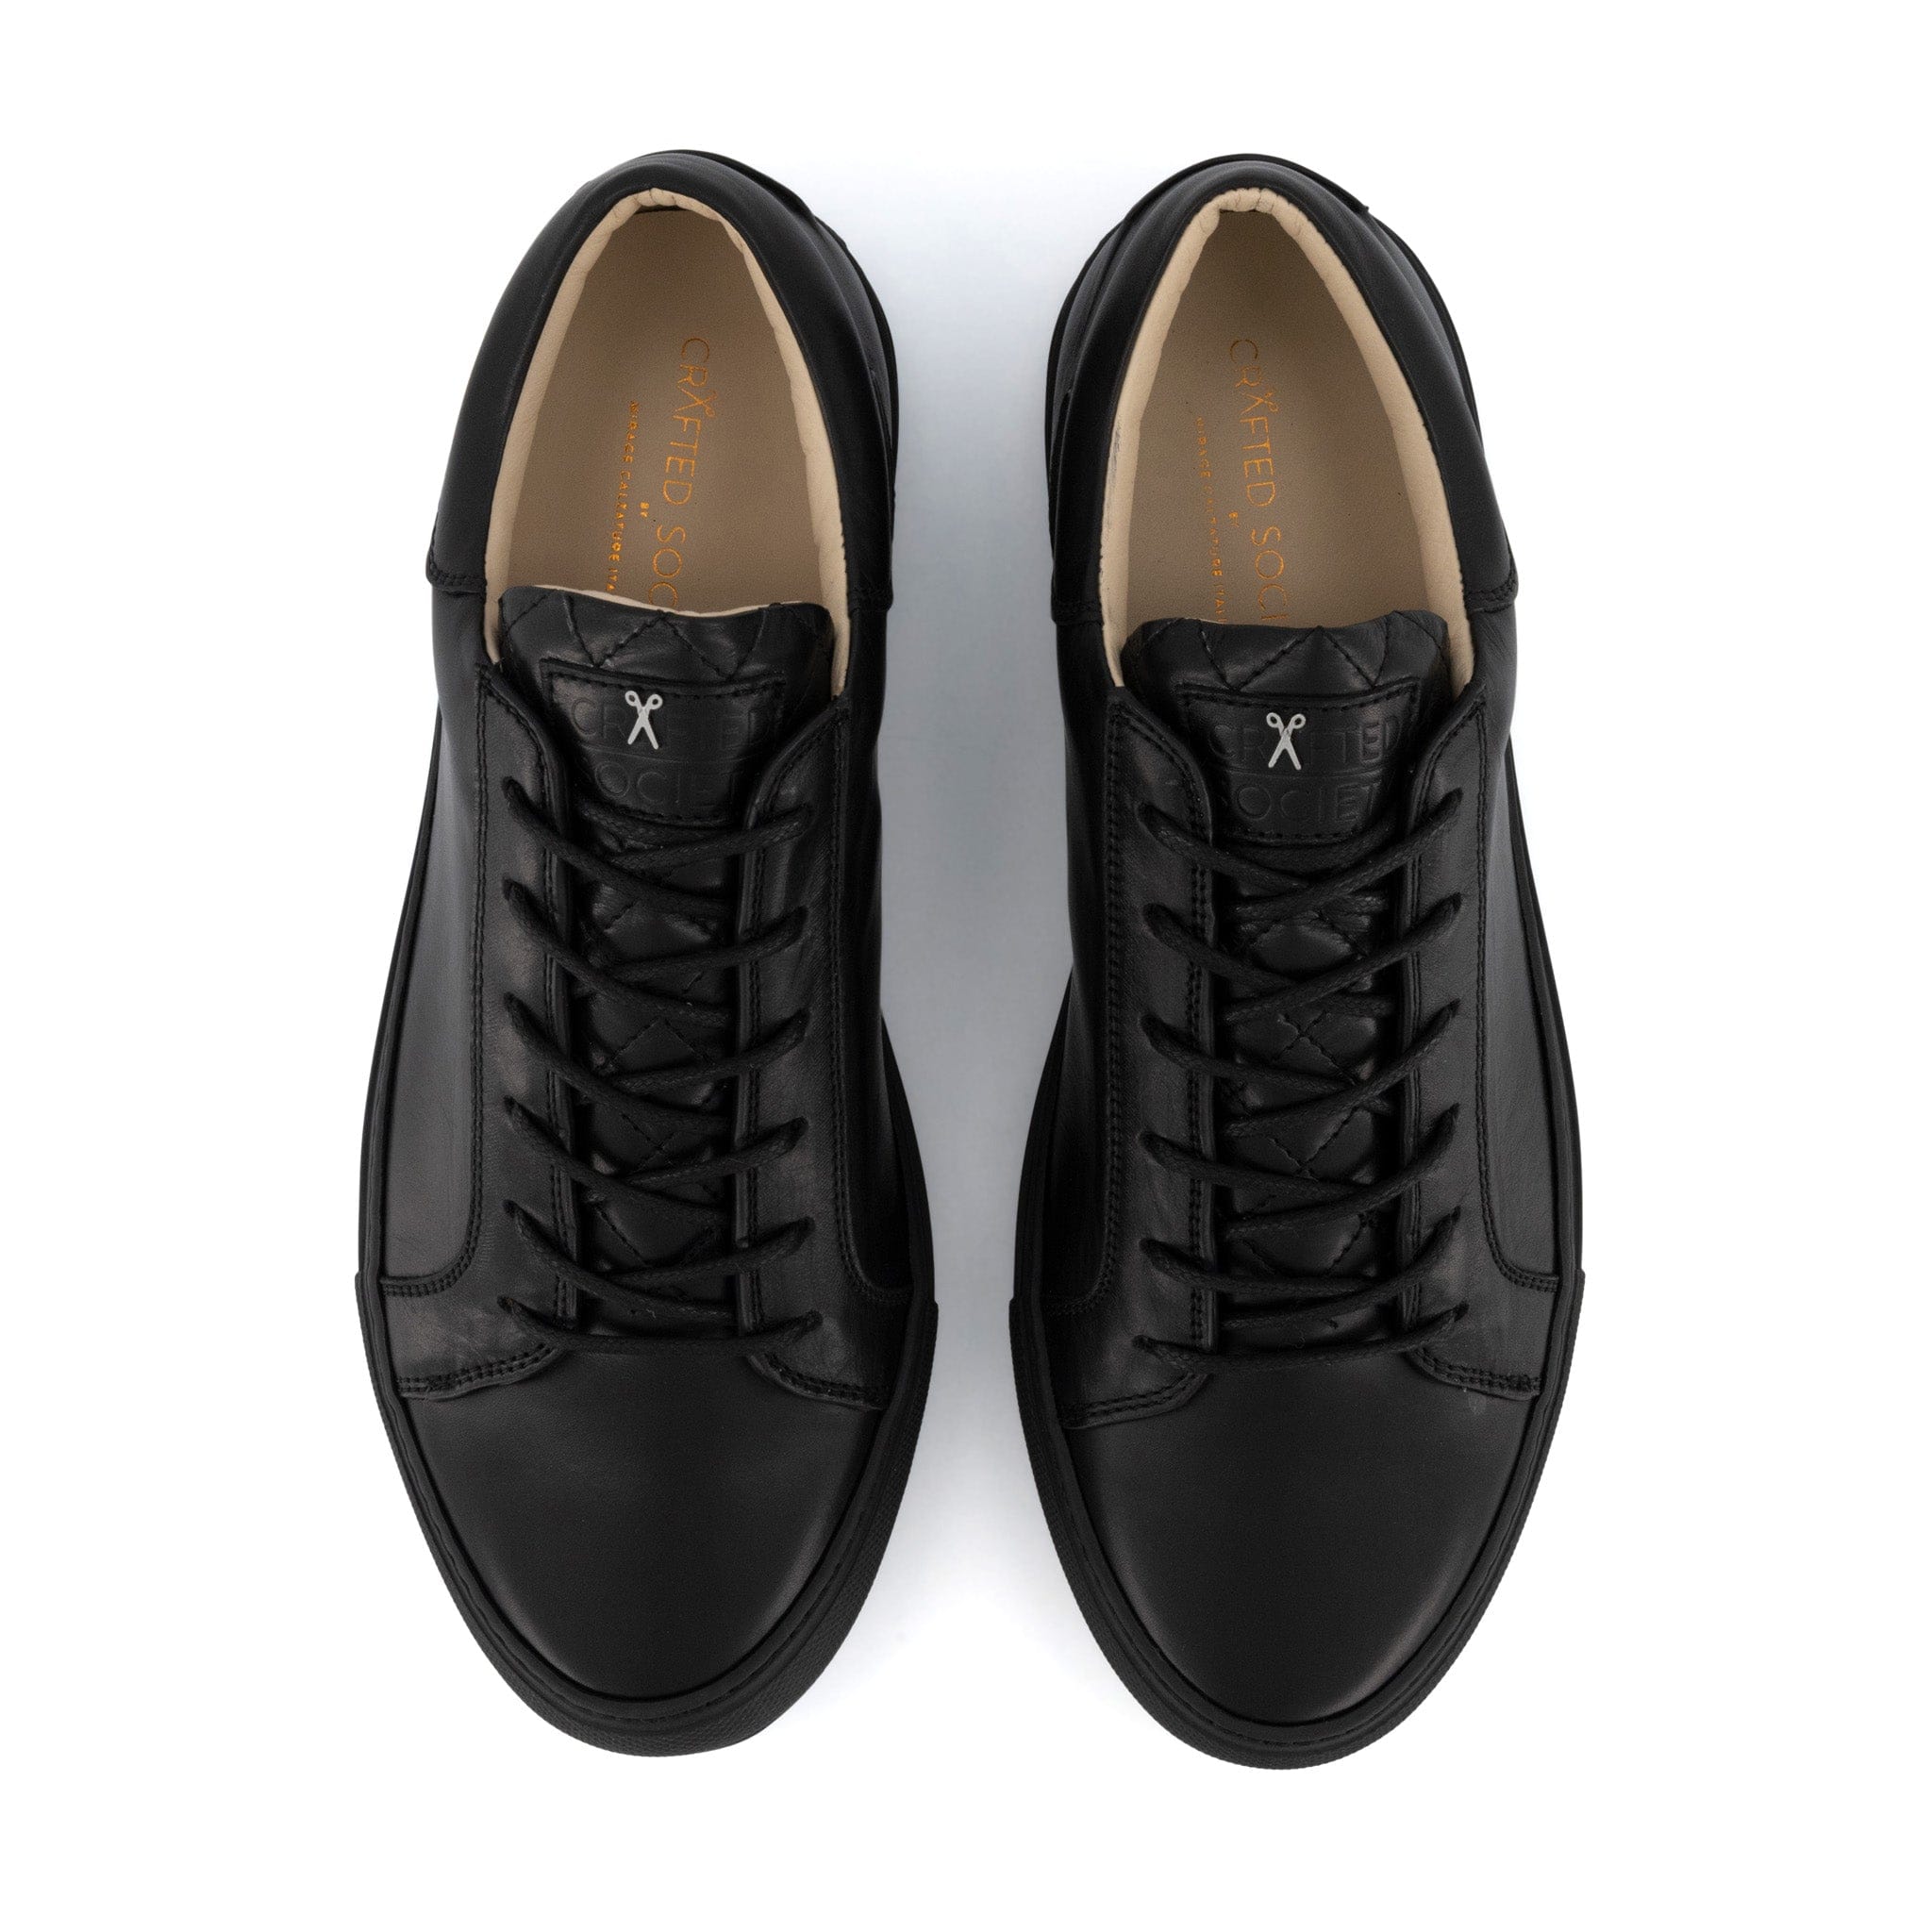 Mario Low Refined Sneaker | Black Full Grain Leather | Black Outsole | Made in Italy